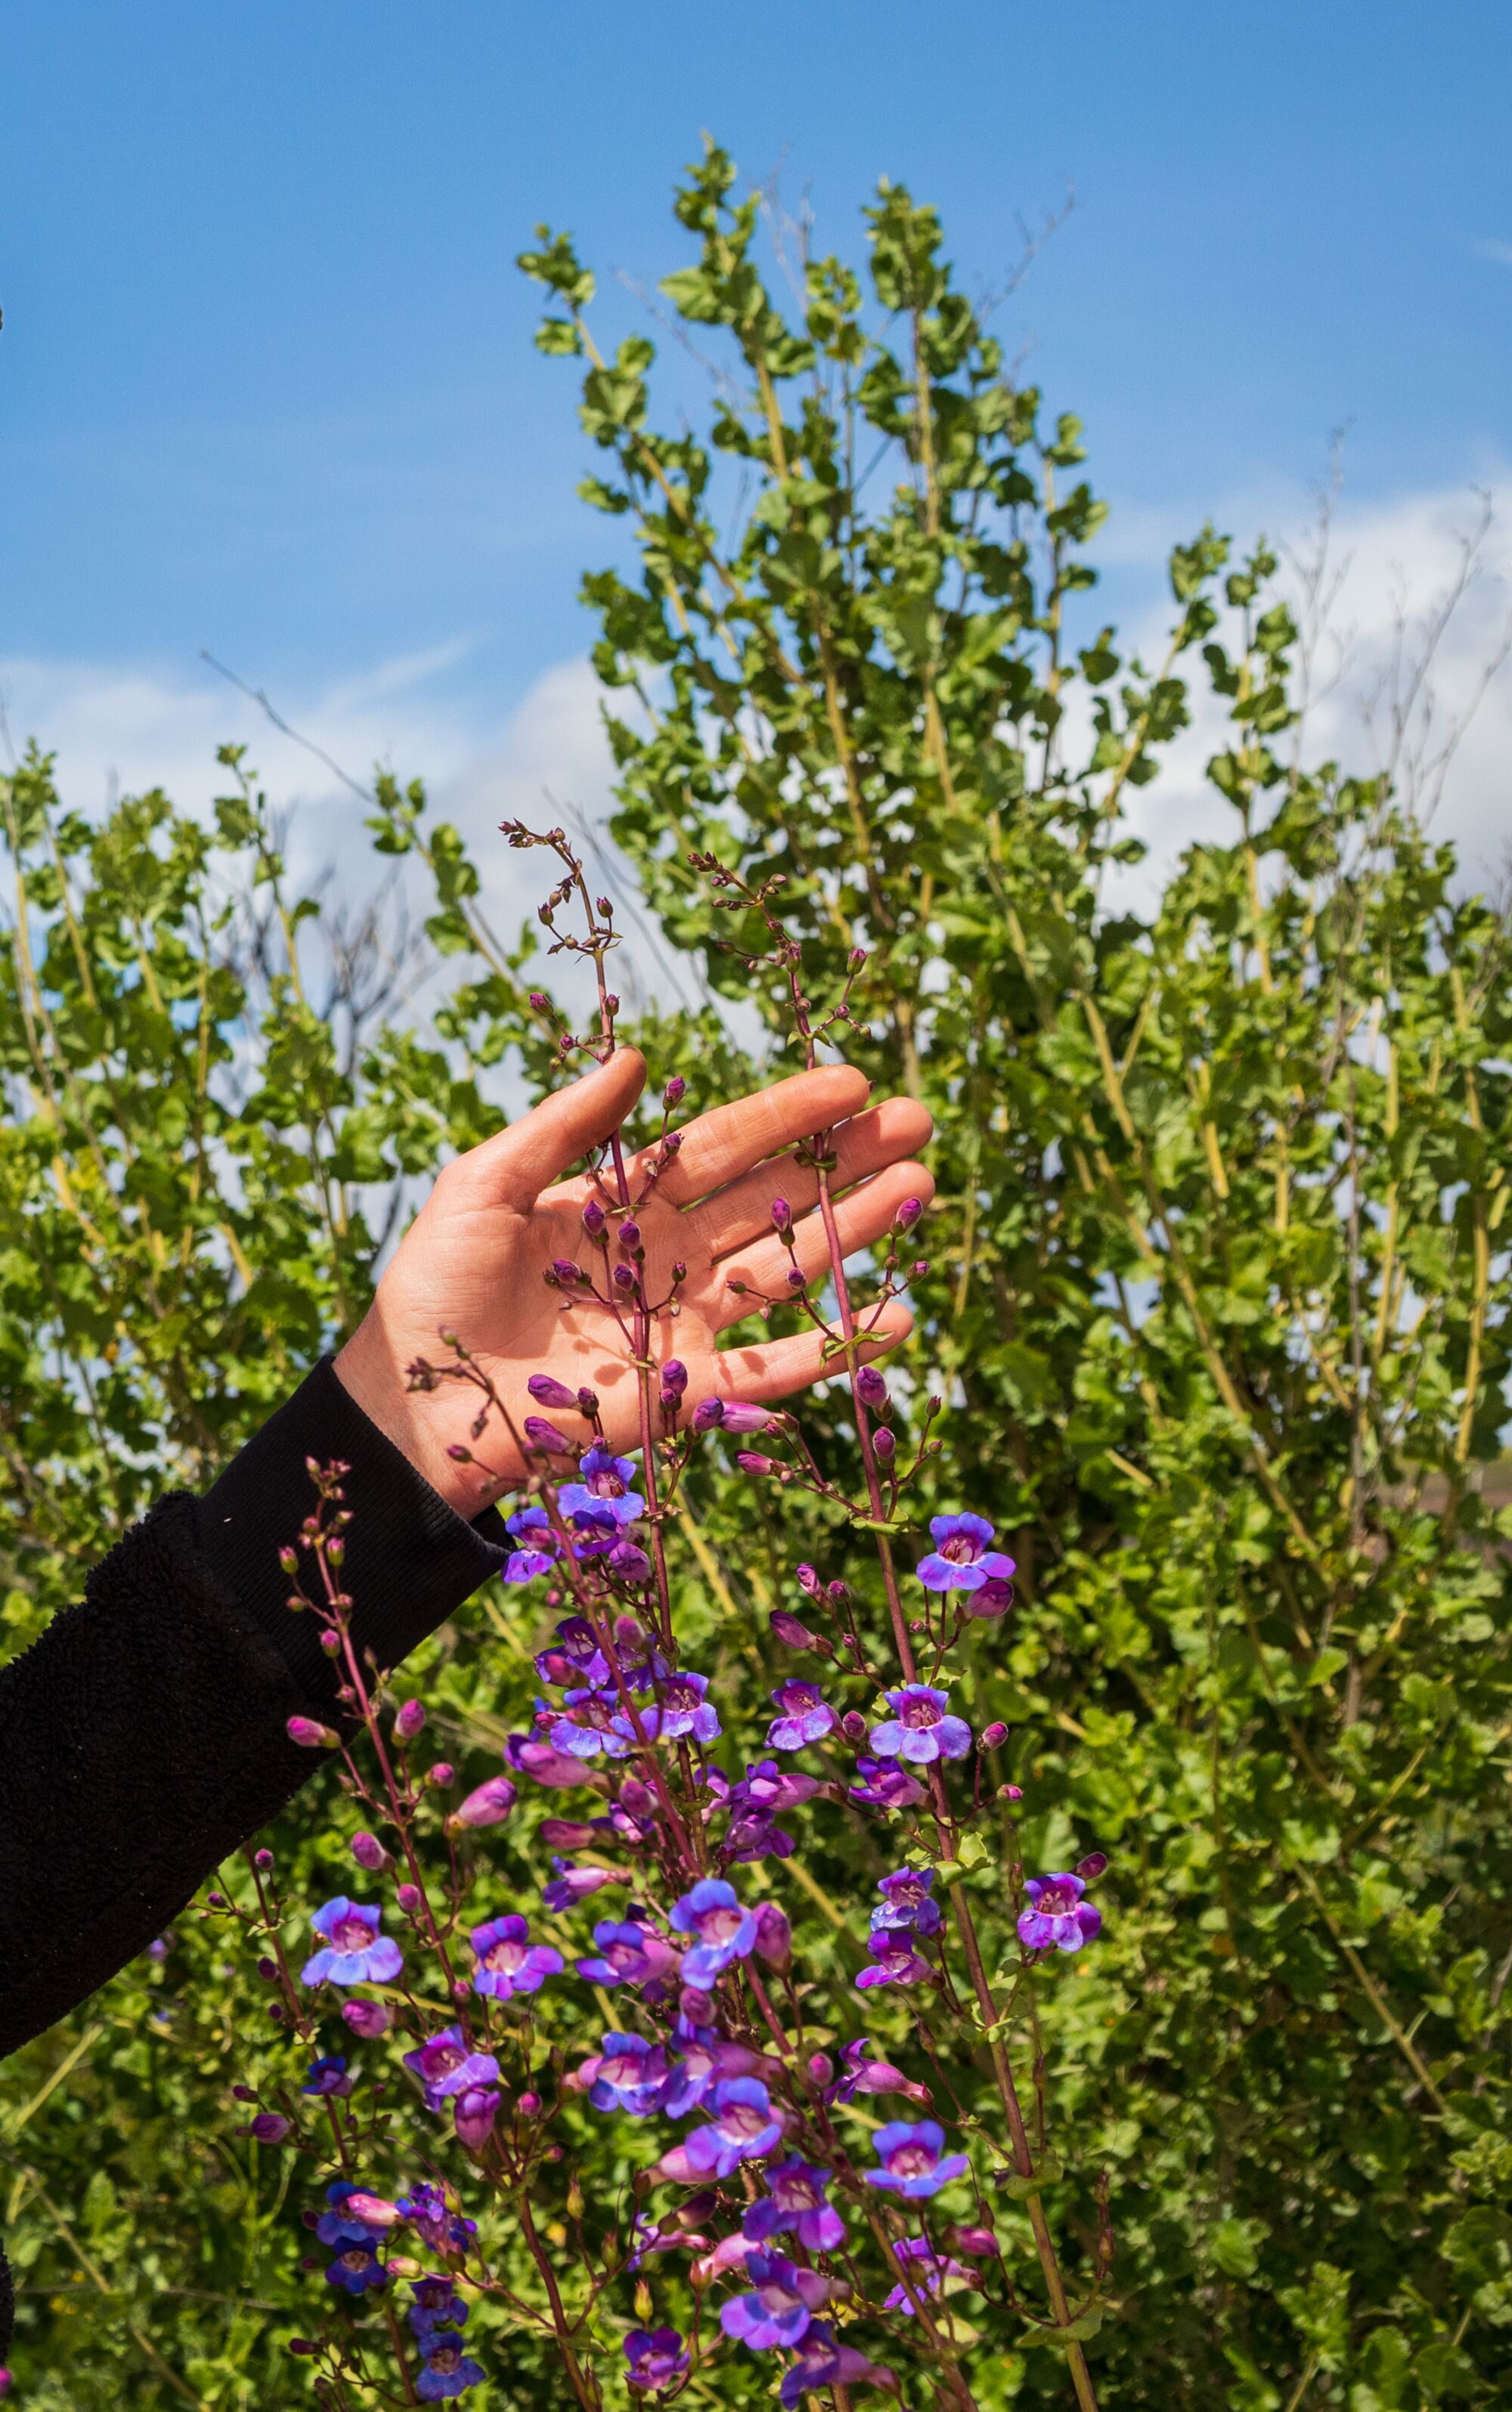 A hand reaching out to touch showy penstemon, Penstemon spectabilis, a native plant with purple flowers.